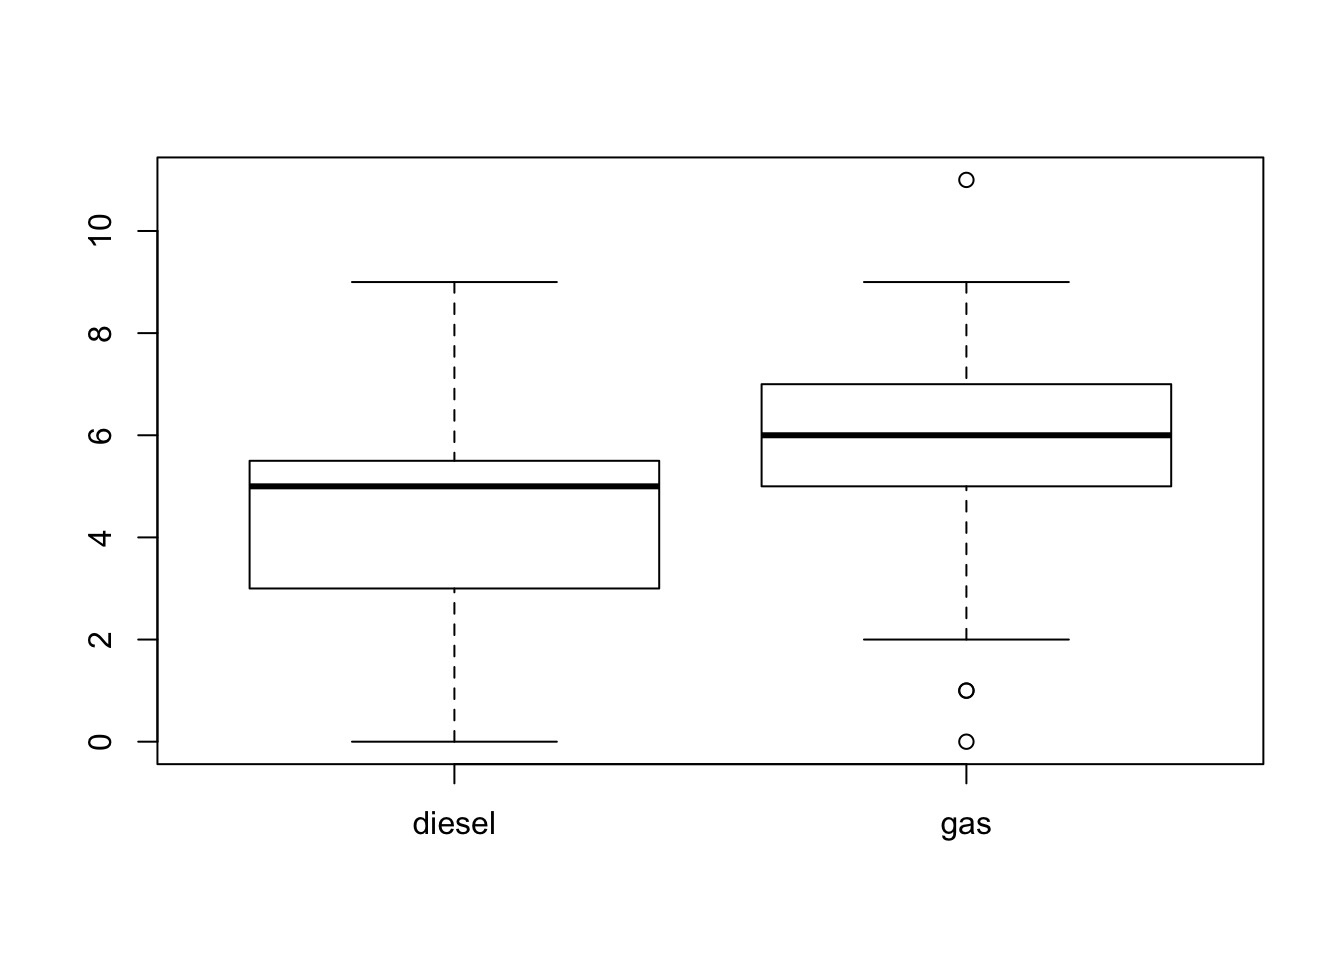 Box Plots of Differences in MPG